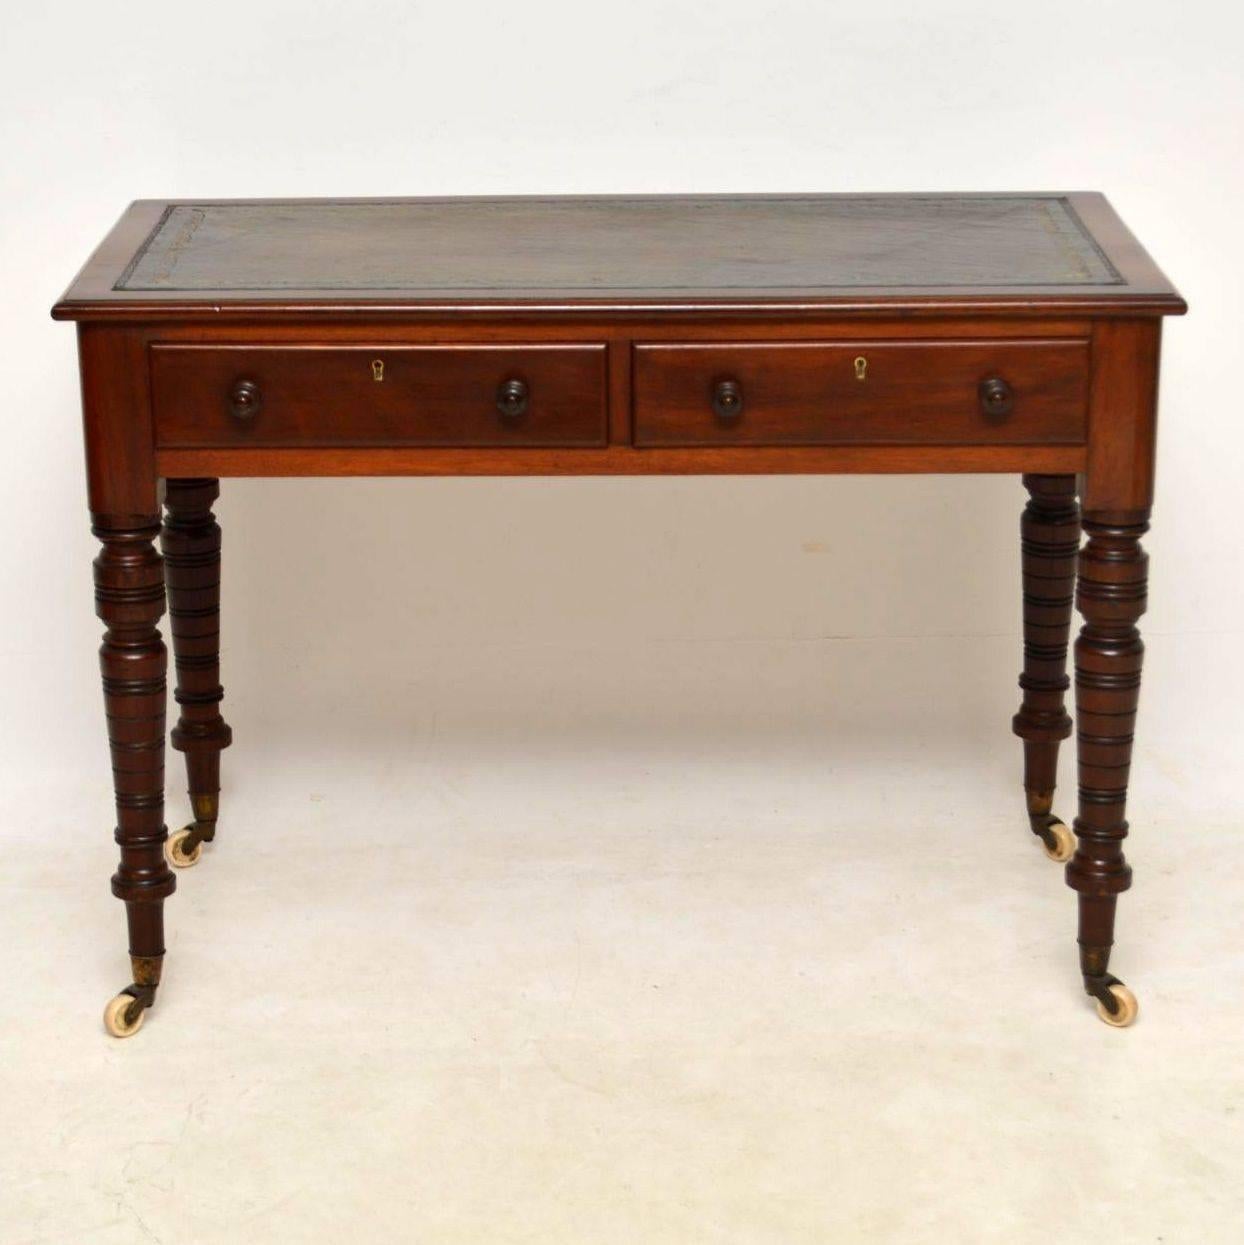 Antique Victorian mahogany leather top writing table desk in good condition. It has a tooled leather writing surface, two drawers on the front with turned wooden handles and locks, plus the back is polished too. The legs have a multitude of turnings